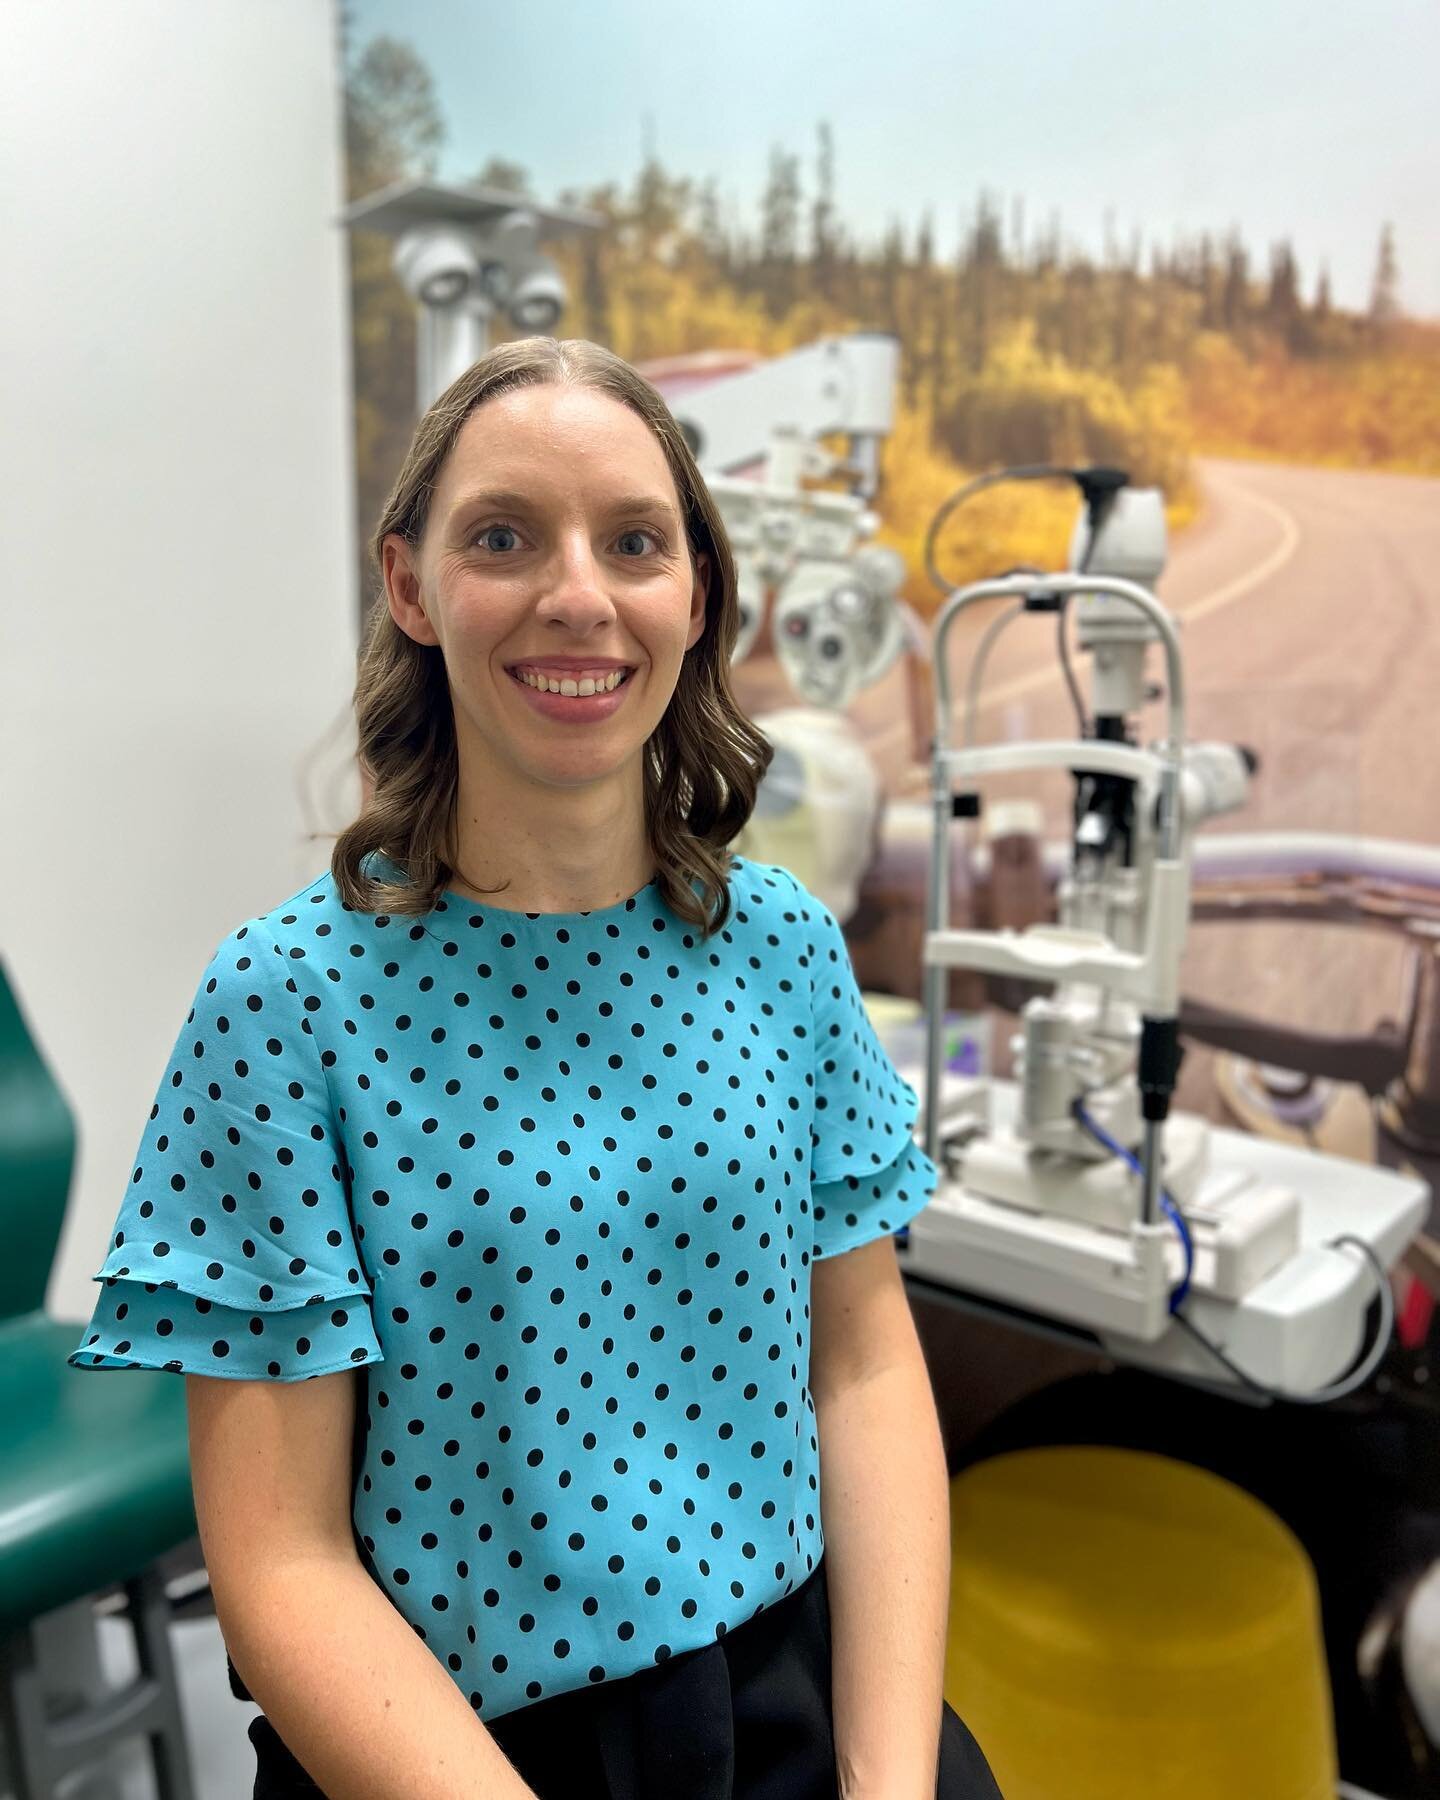 Guess who&rsquo;s back! We welcome back a friendly face who started her career in optometry with us after finishing uni. We are thrilled to have Jess back as a fifth addition to our amazing optometry team! 👓